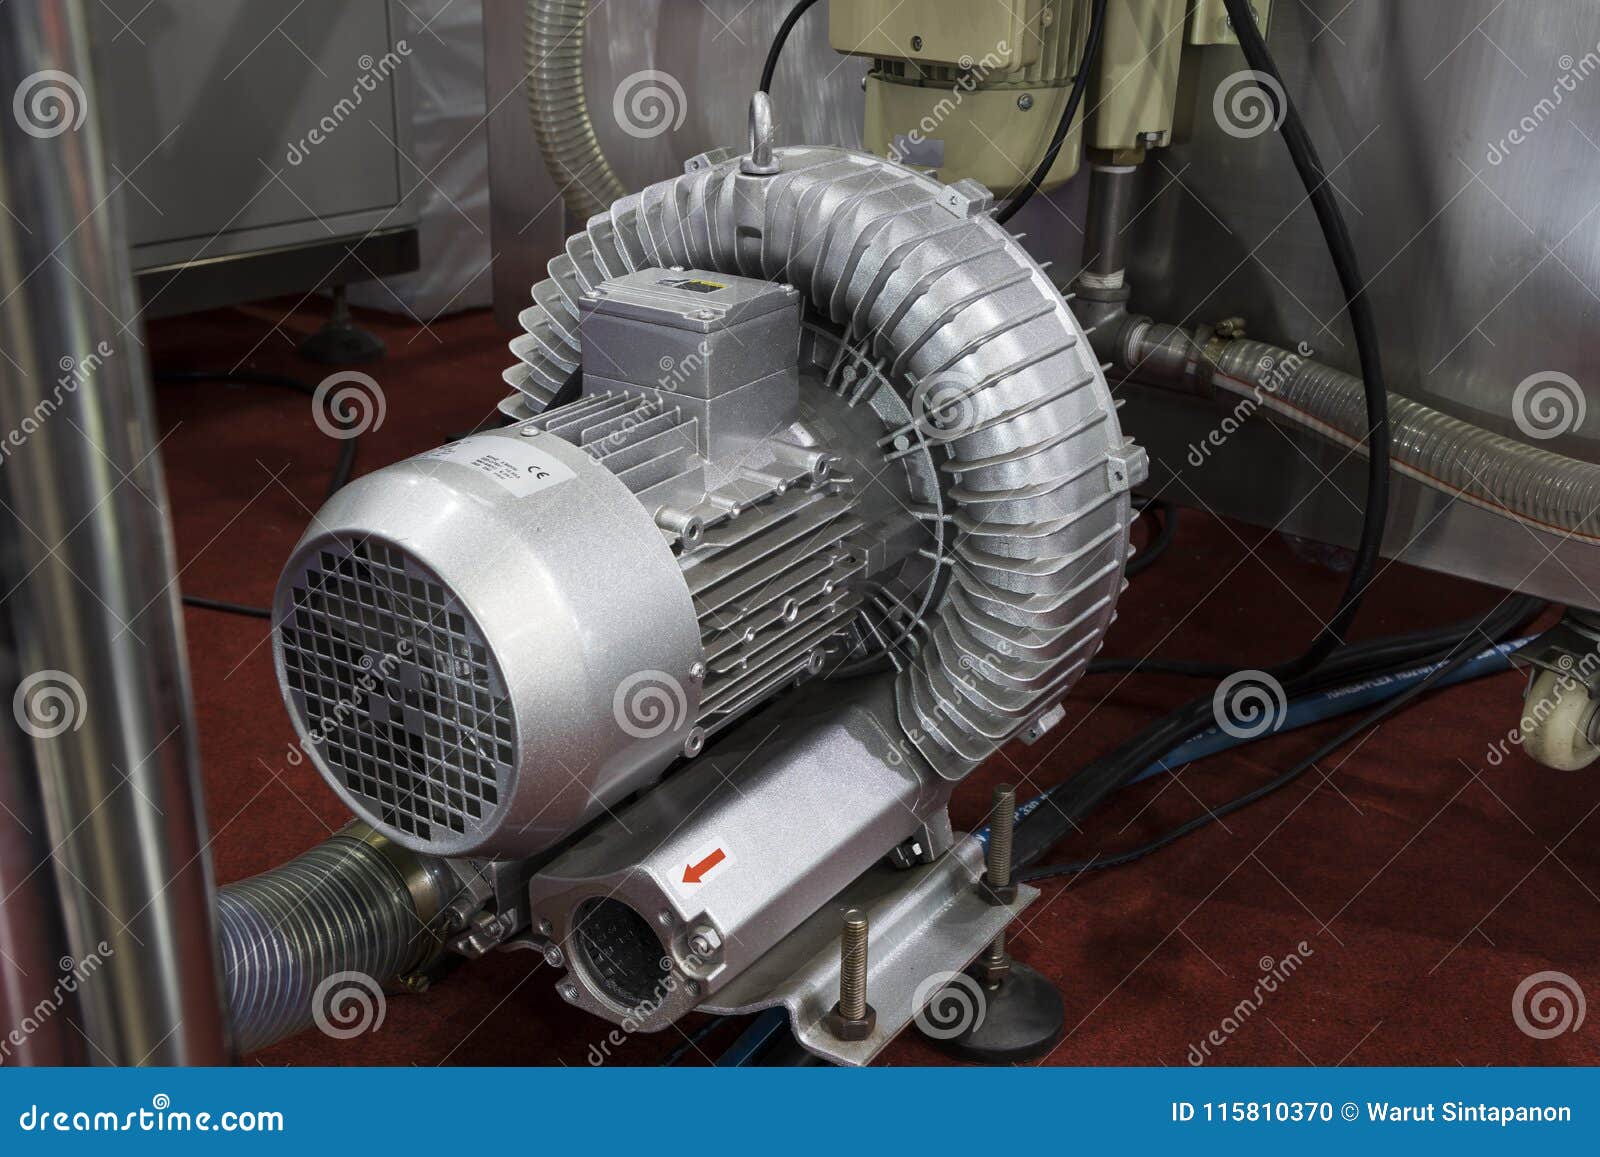 pump of suction polluted air f